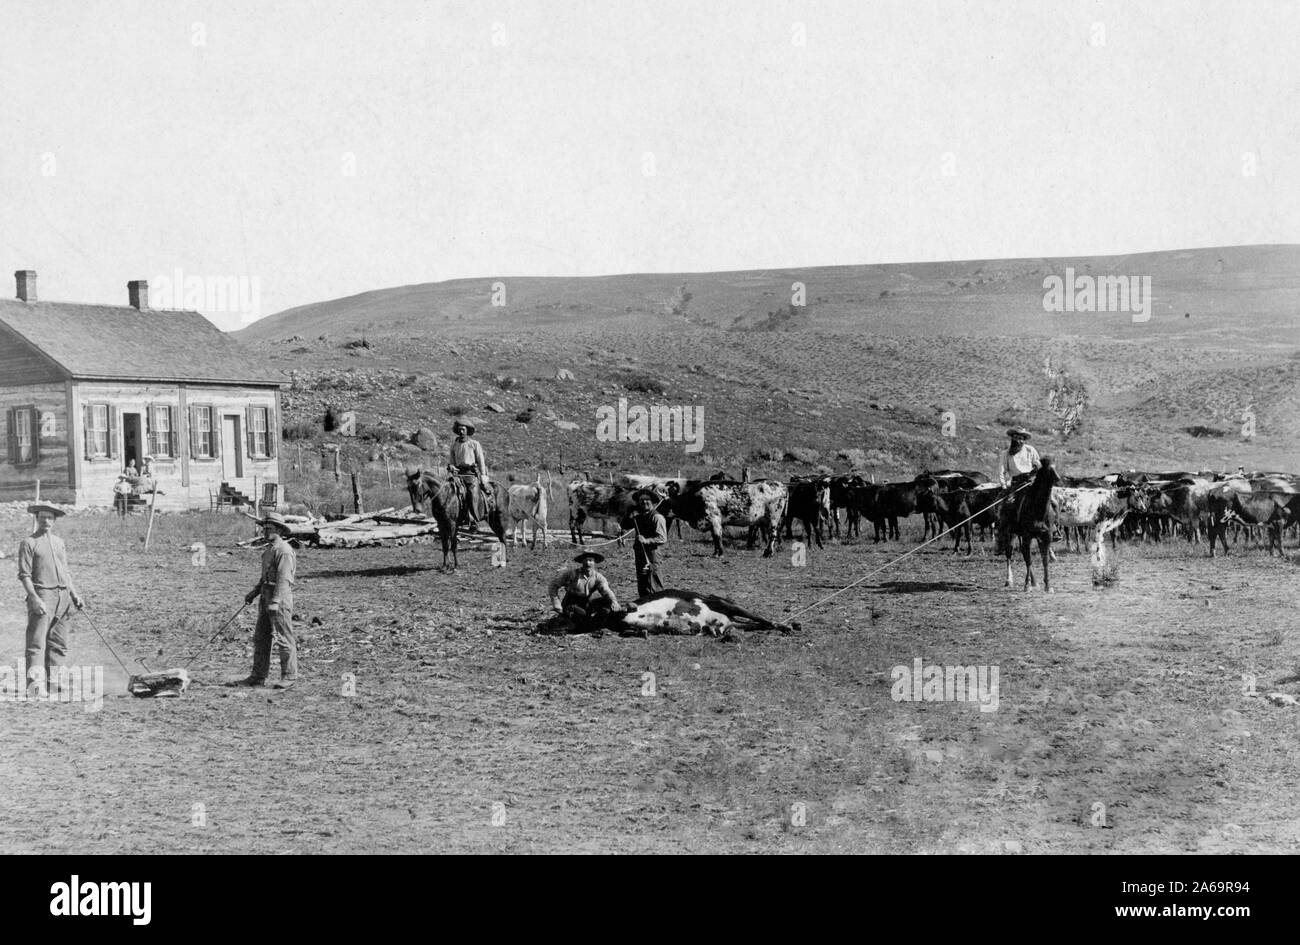 Six cowboys branding cattle in front of a house 1891 Dakota Territory Stock Photo